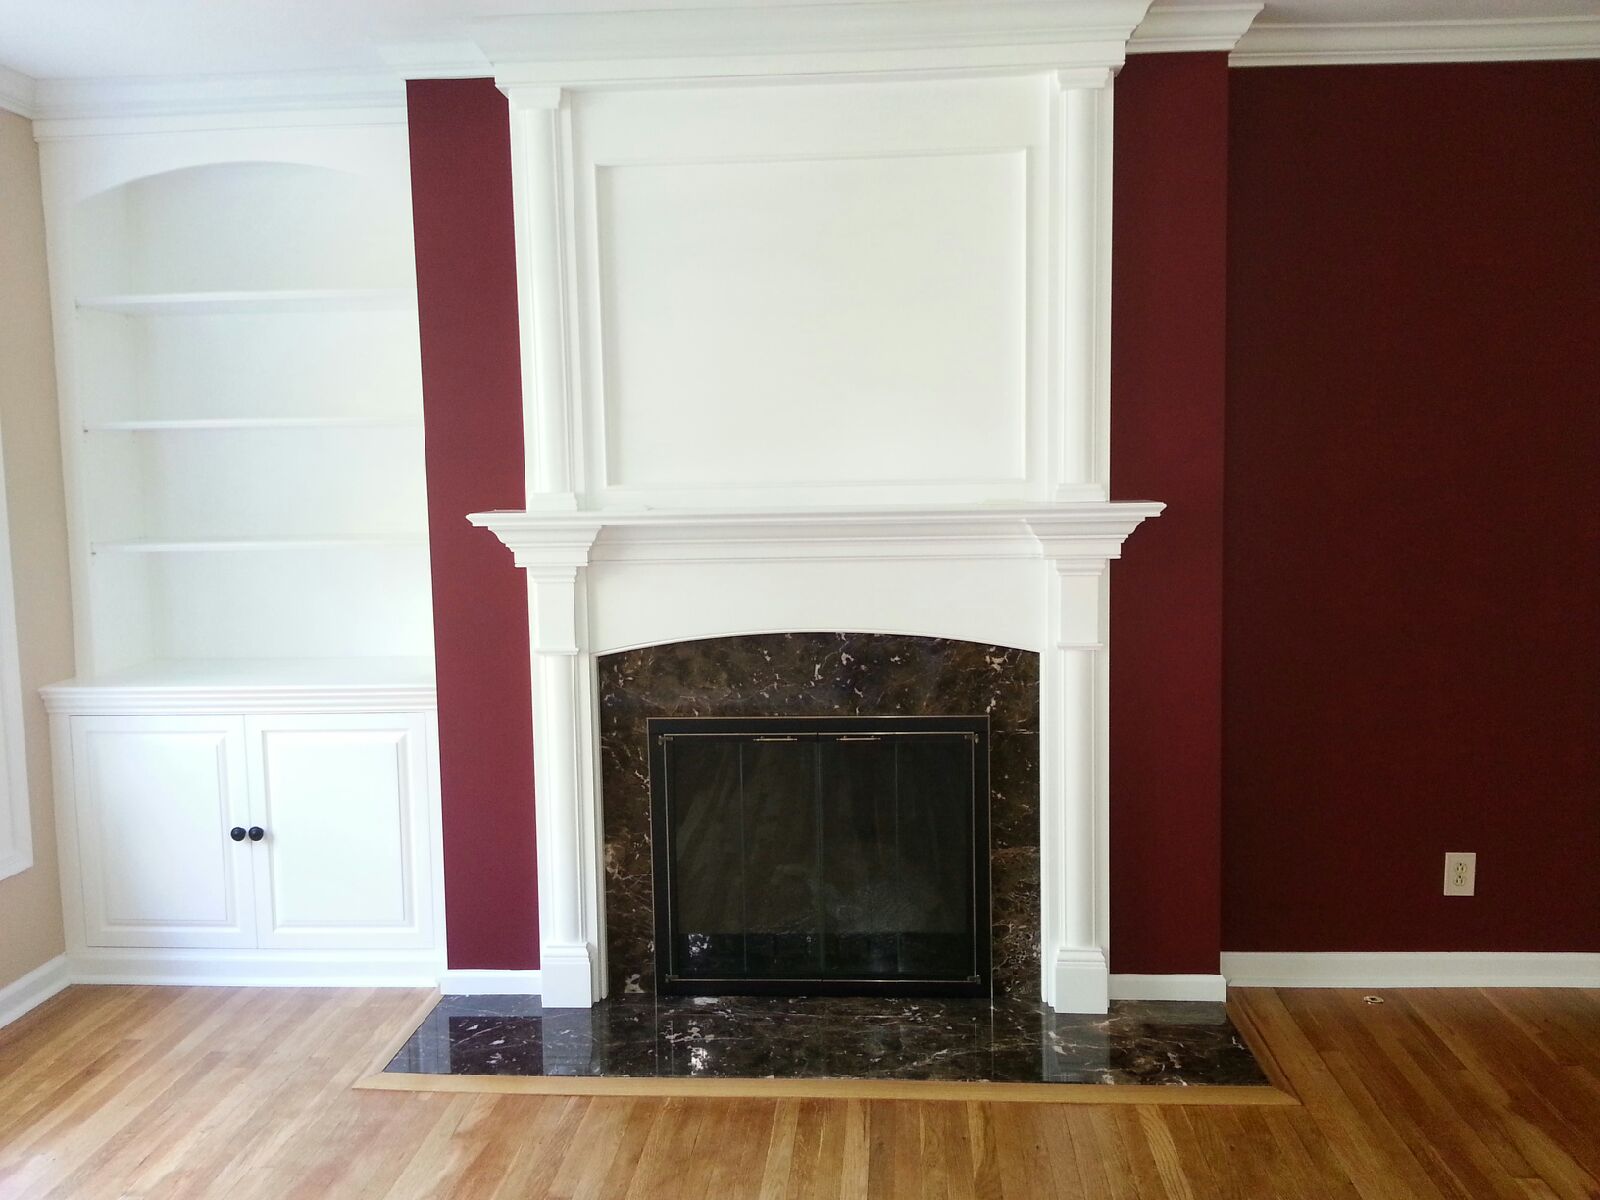 All Custom: Stoll Door, RFS Andover Mantle, Overmantle, Built-in Cabinetry 29167